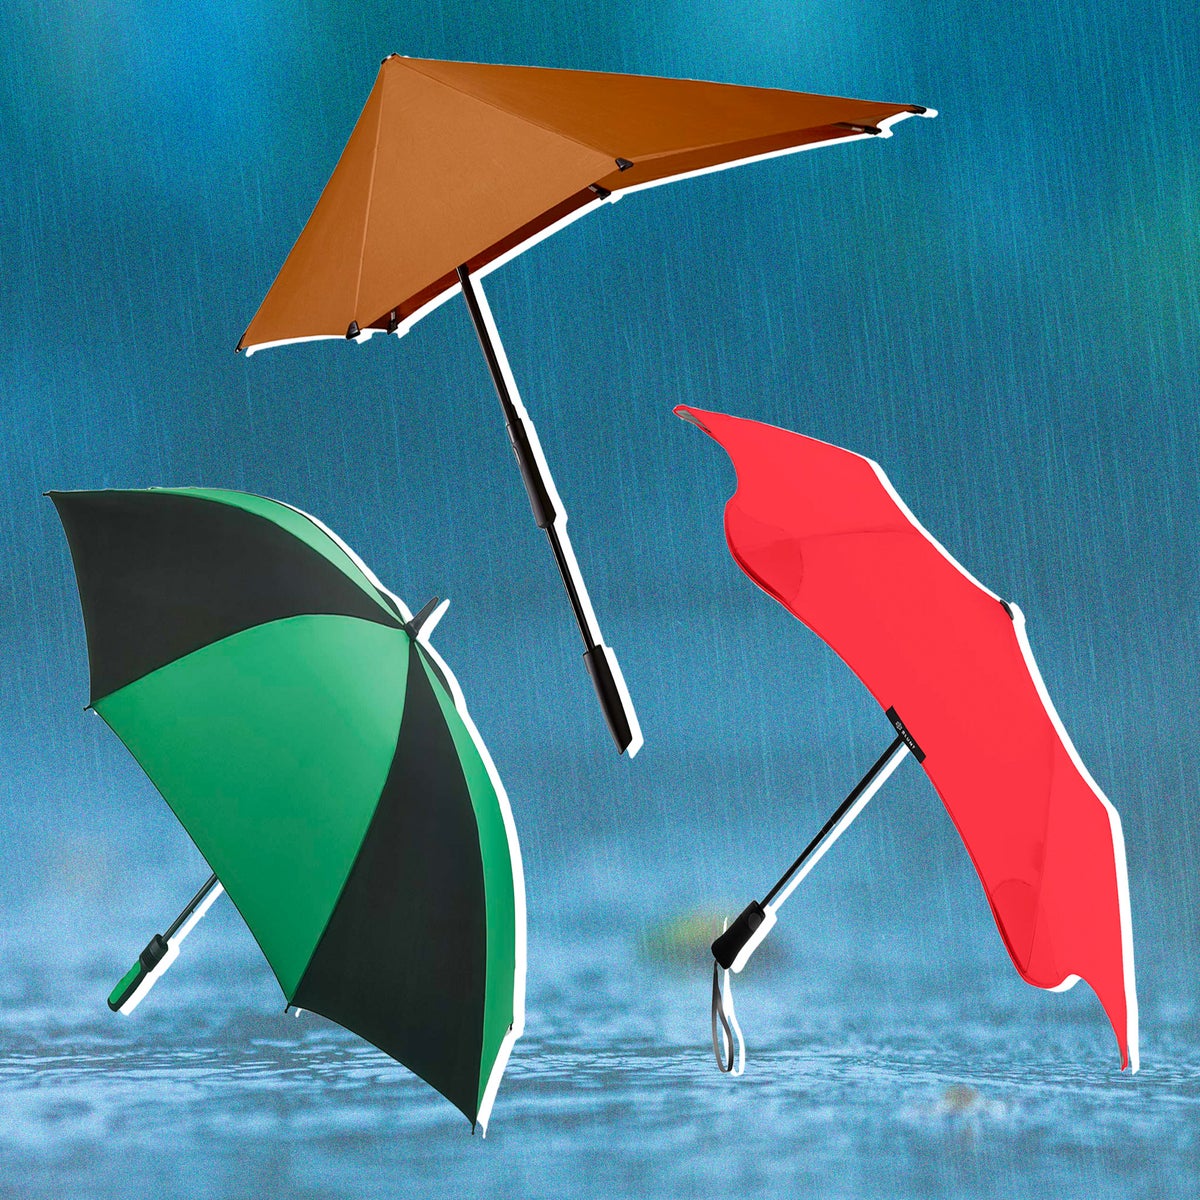 April Showers: Umbrellas - Stay dry!